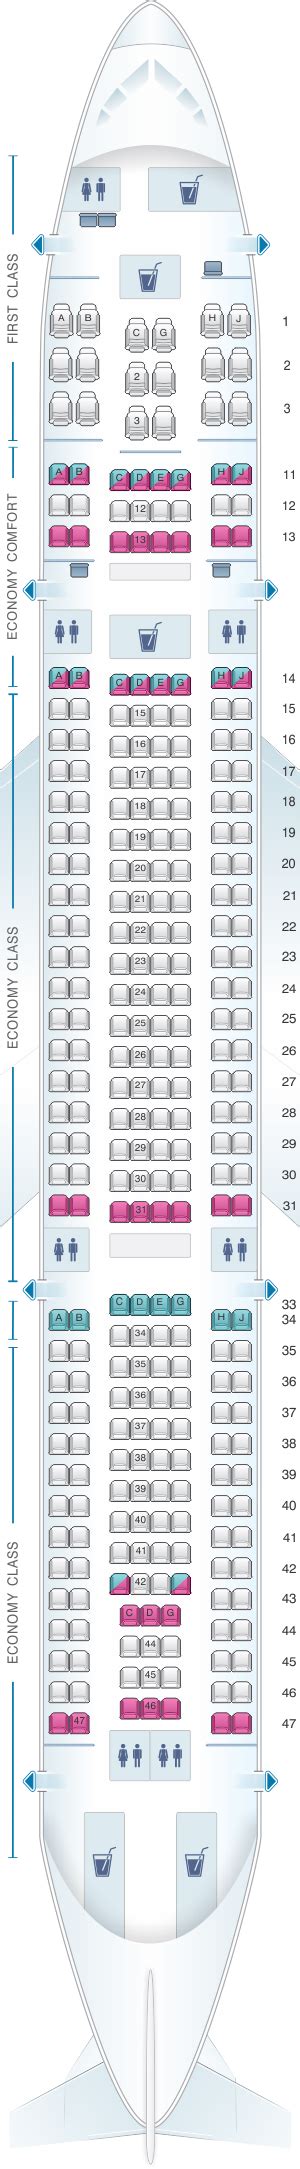 Oct 25, 2013 - For your next Hawaiian Airlines flight, use this seating chart to get the most comfortable seats, legroom, and recline on .. 